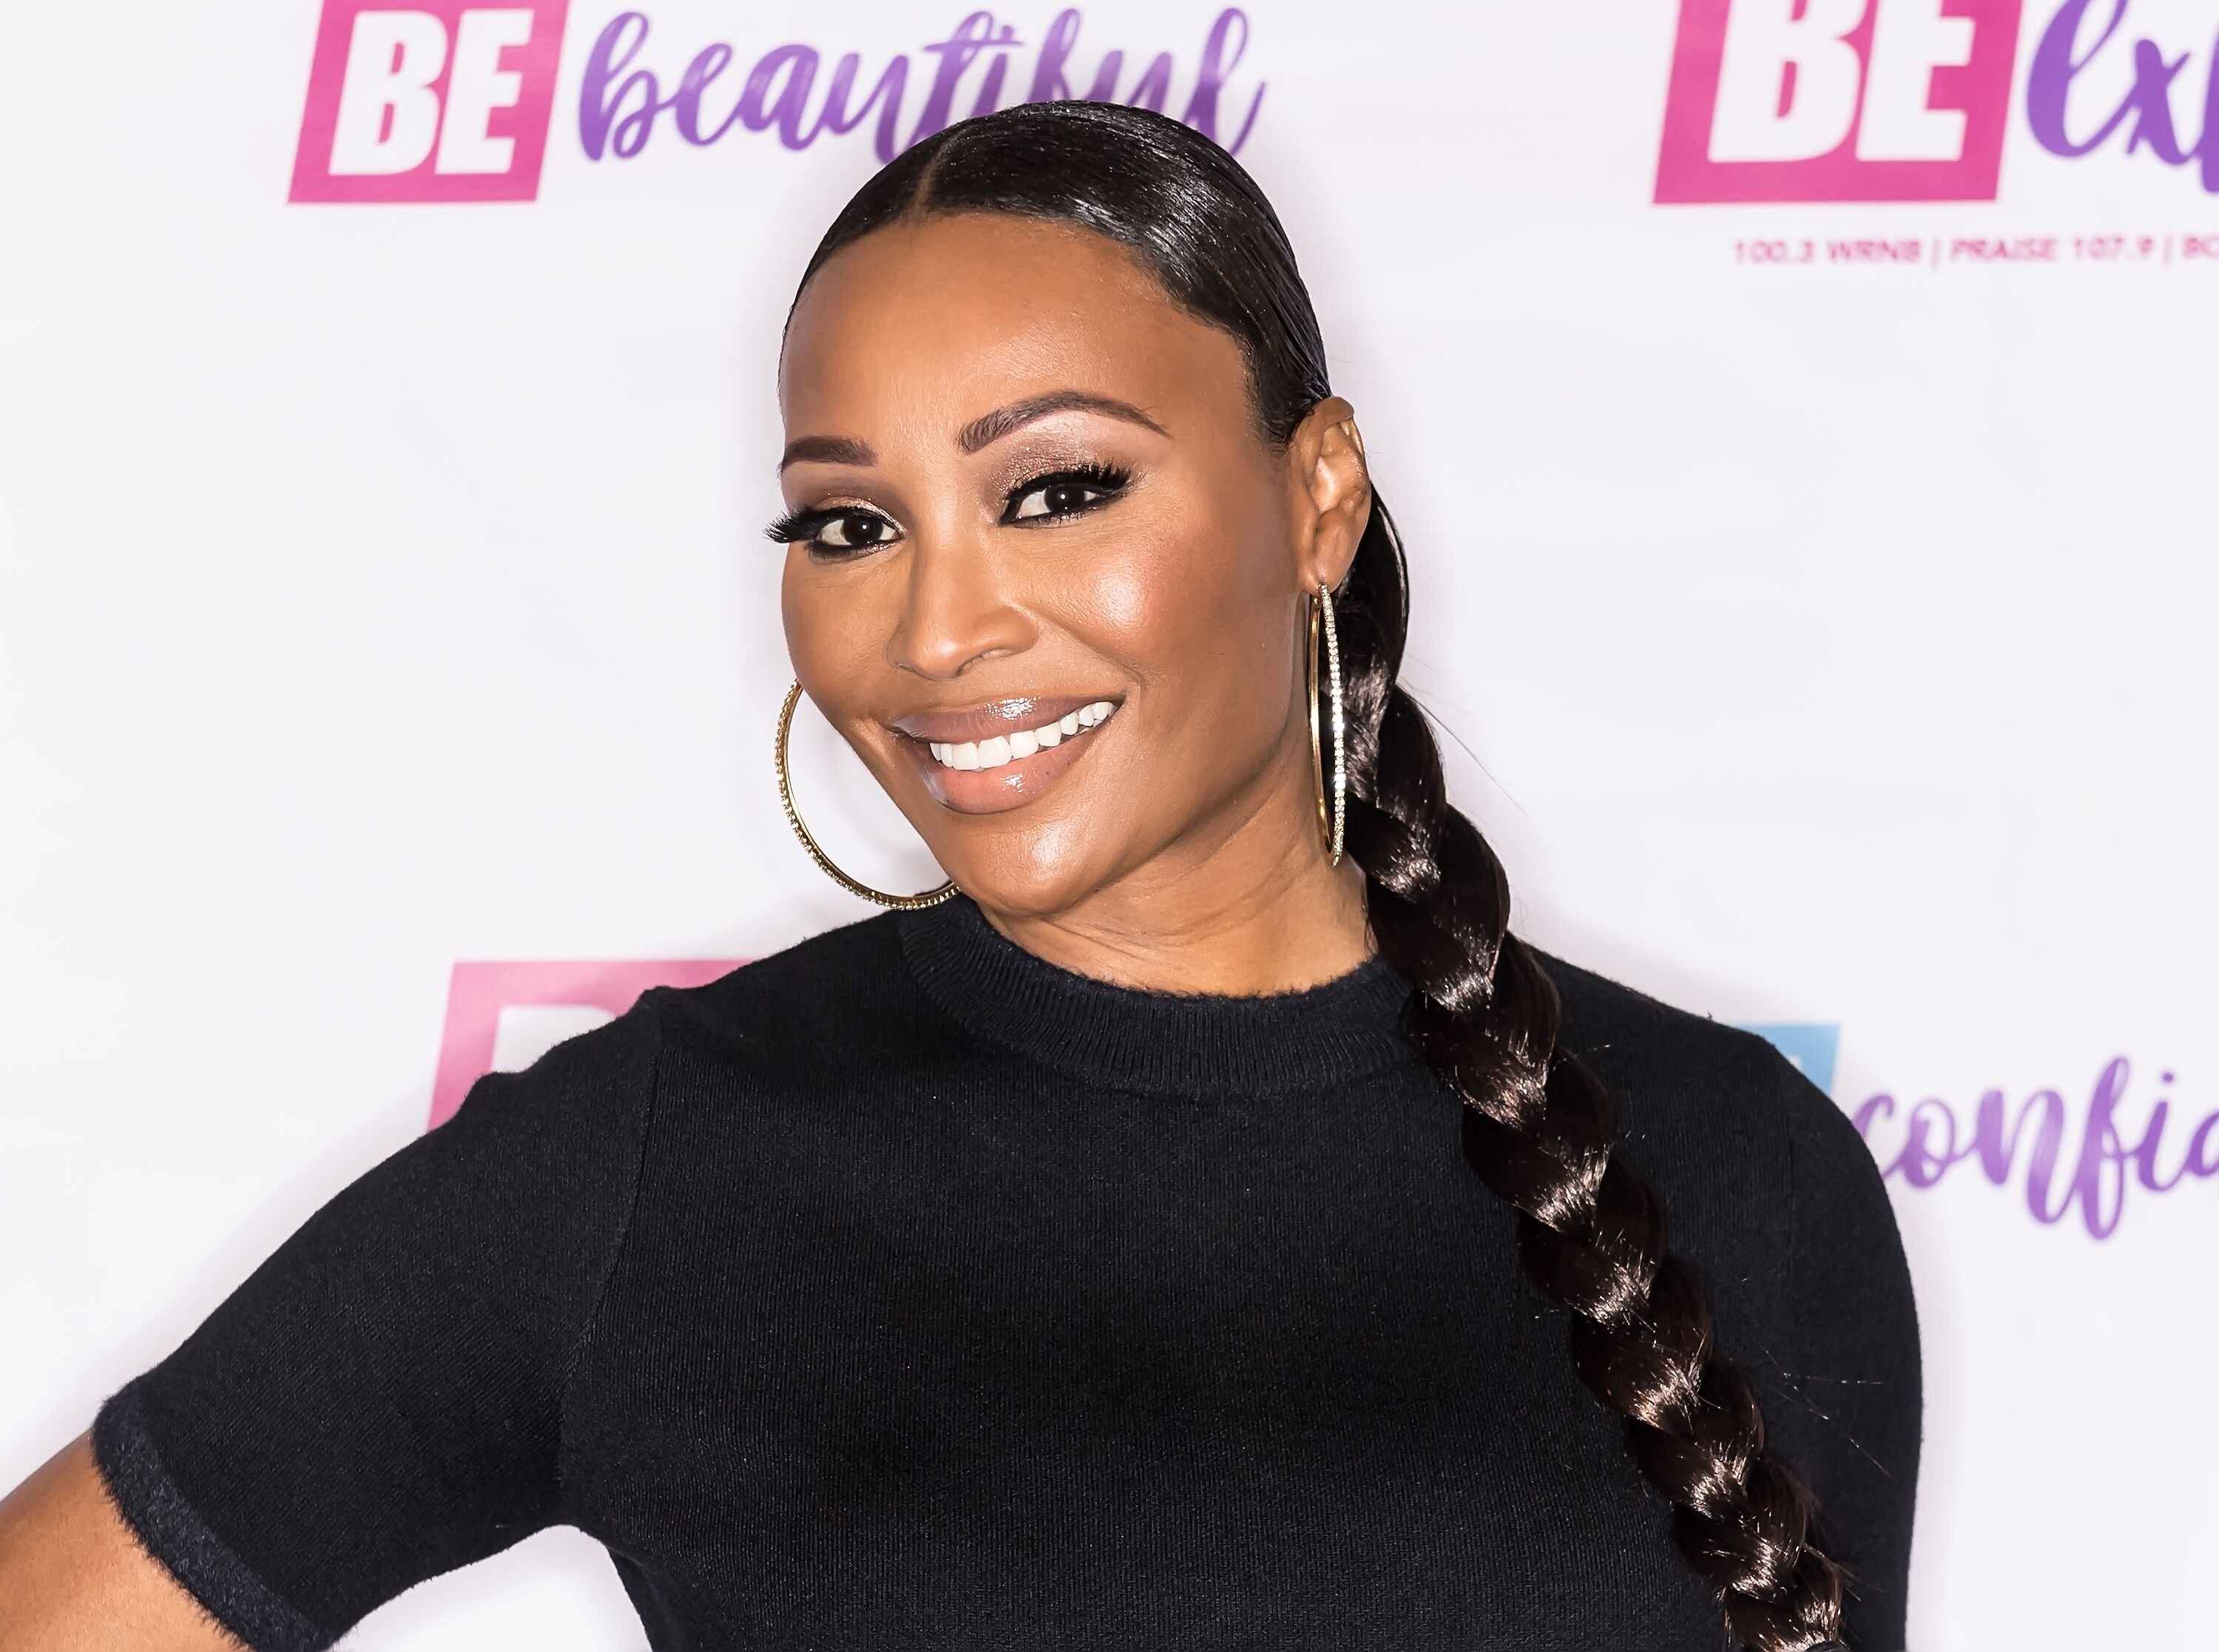 Cynthia Bailey smiles for the camera at an event | Source: Getty Images/GlobalImagesUkraine